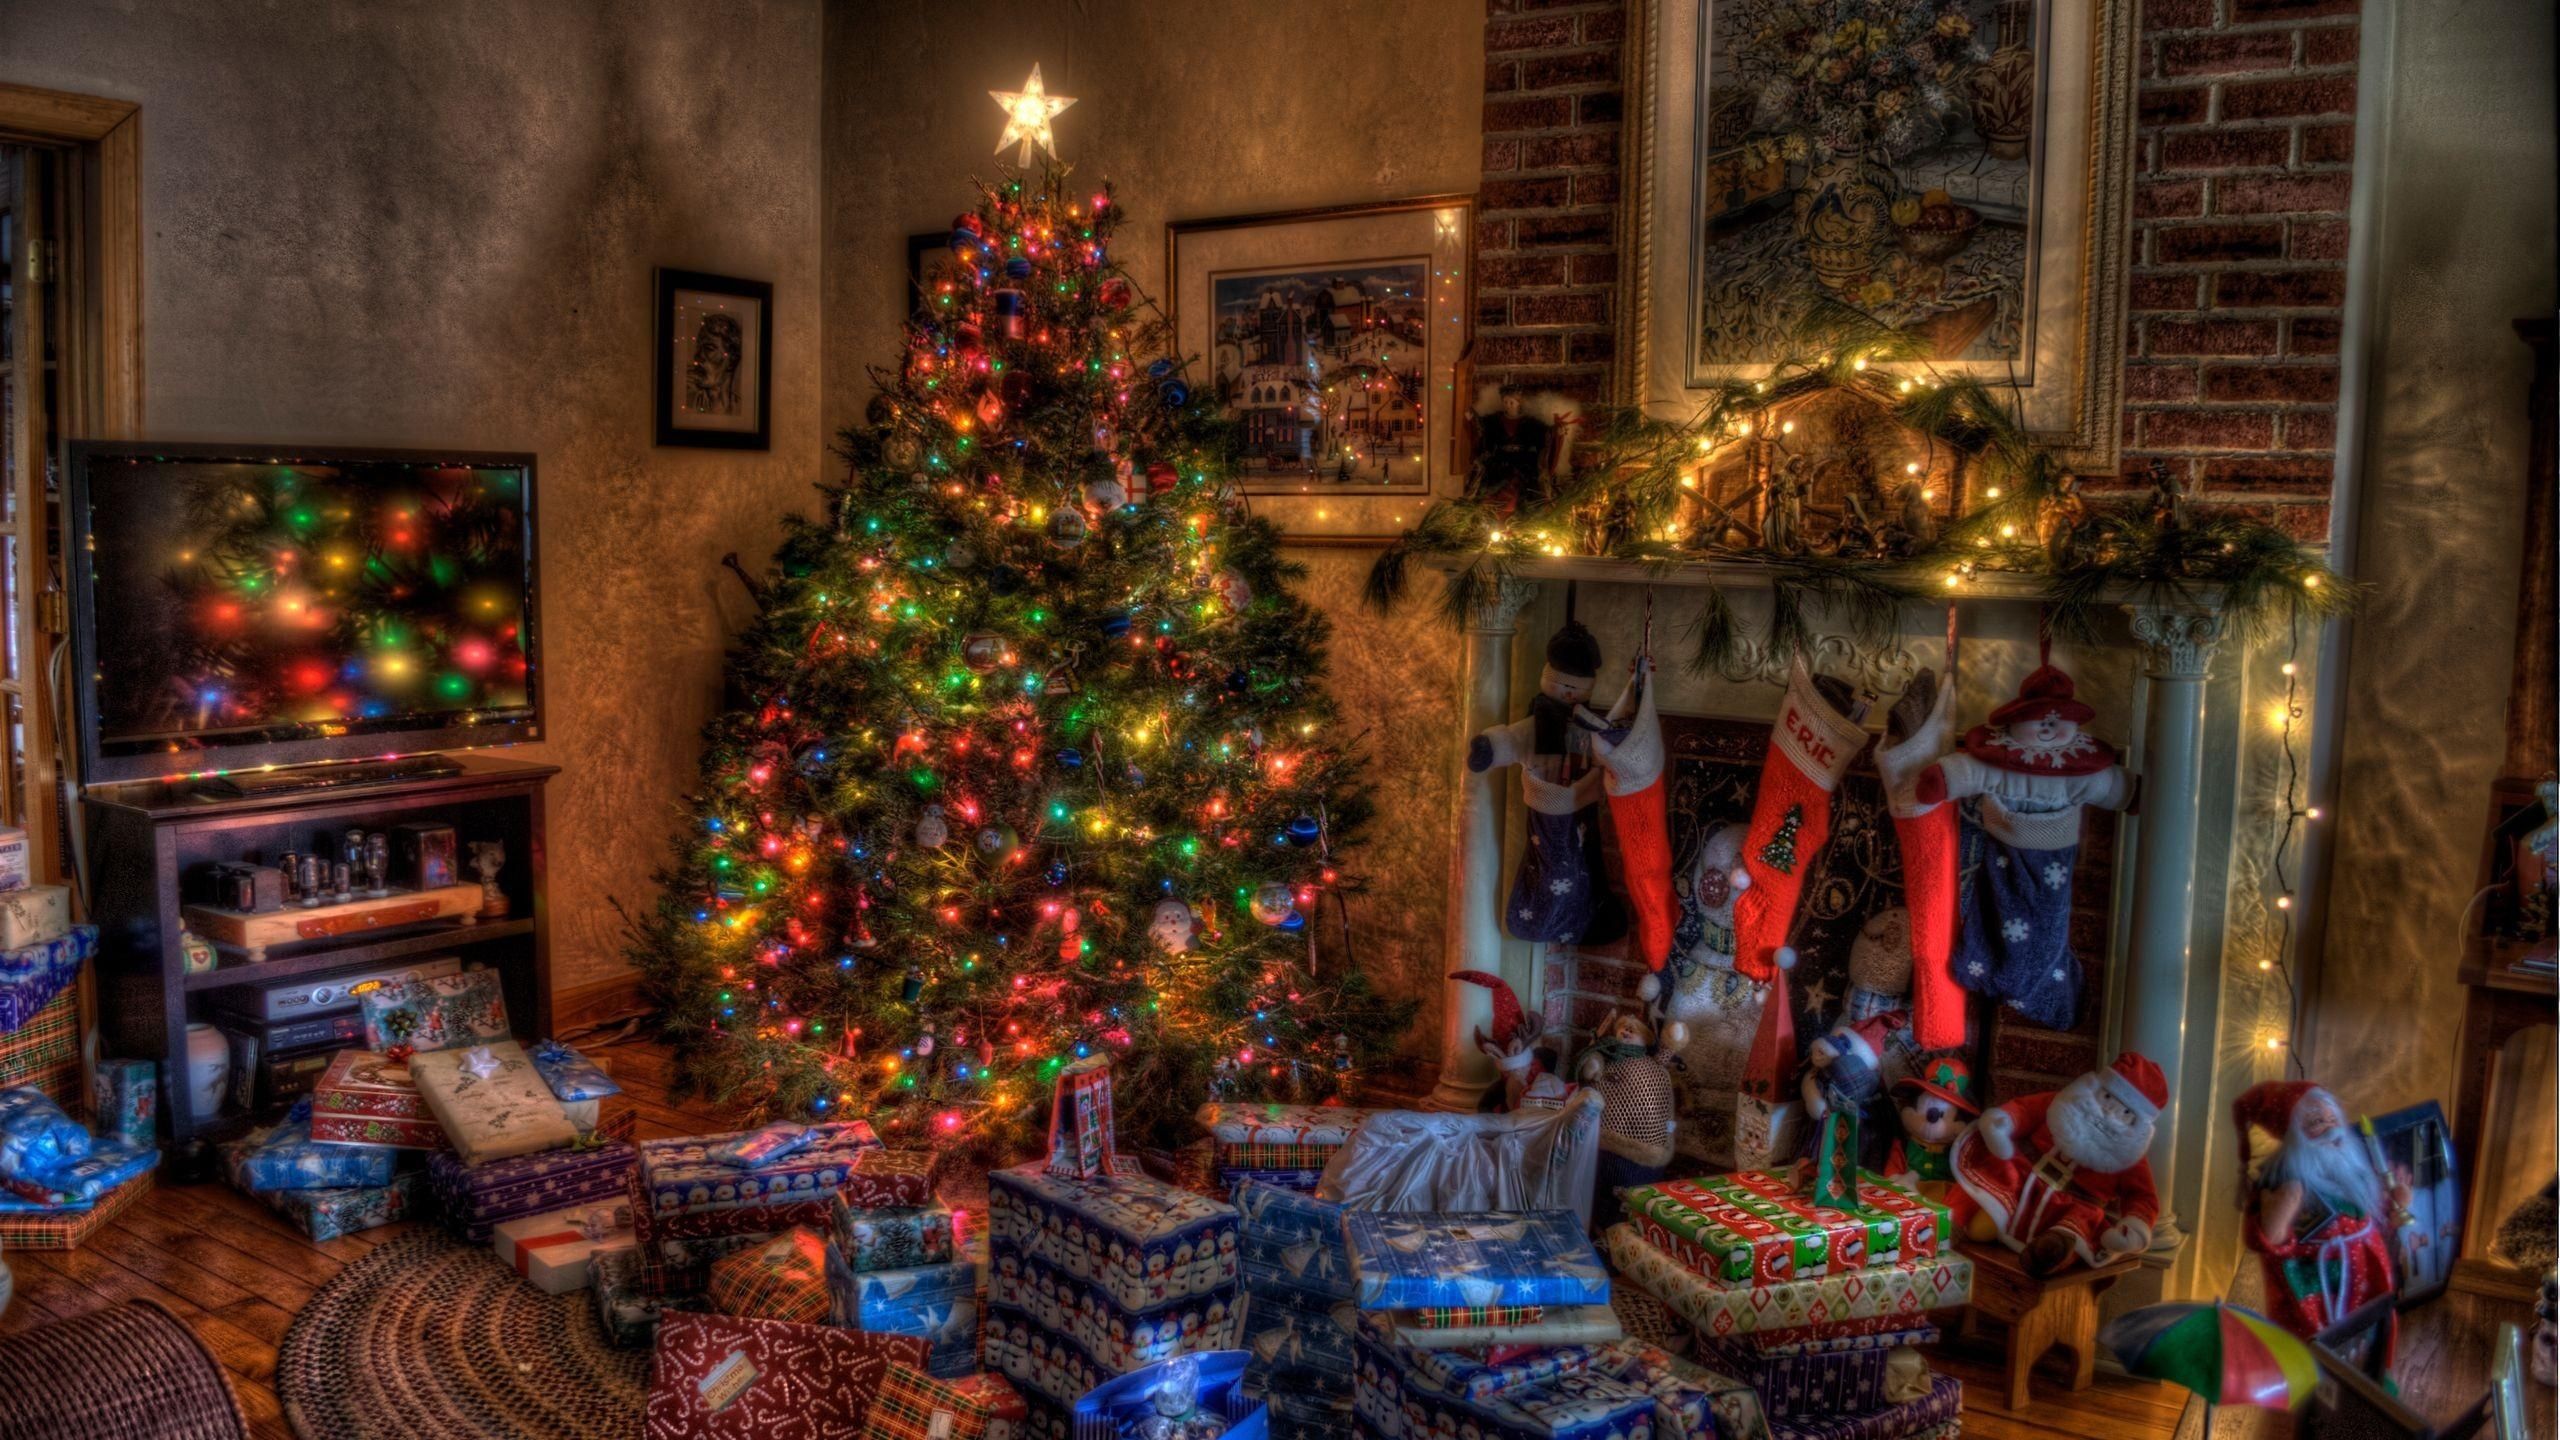 Download Wallpaper 2560x1440 Tree, Christmas, Presents, Fireplace